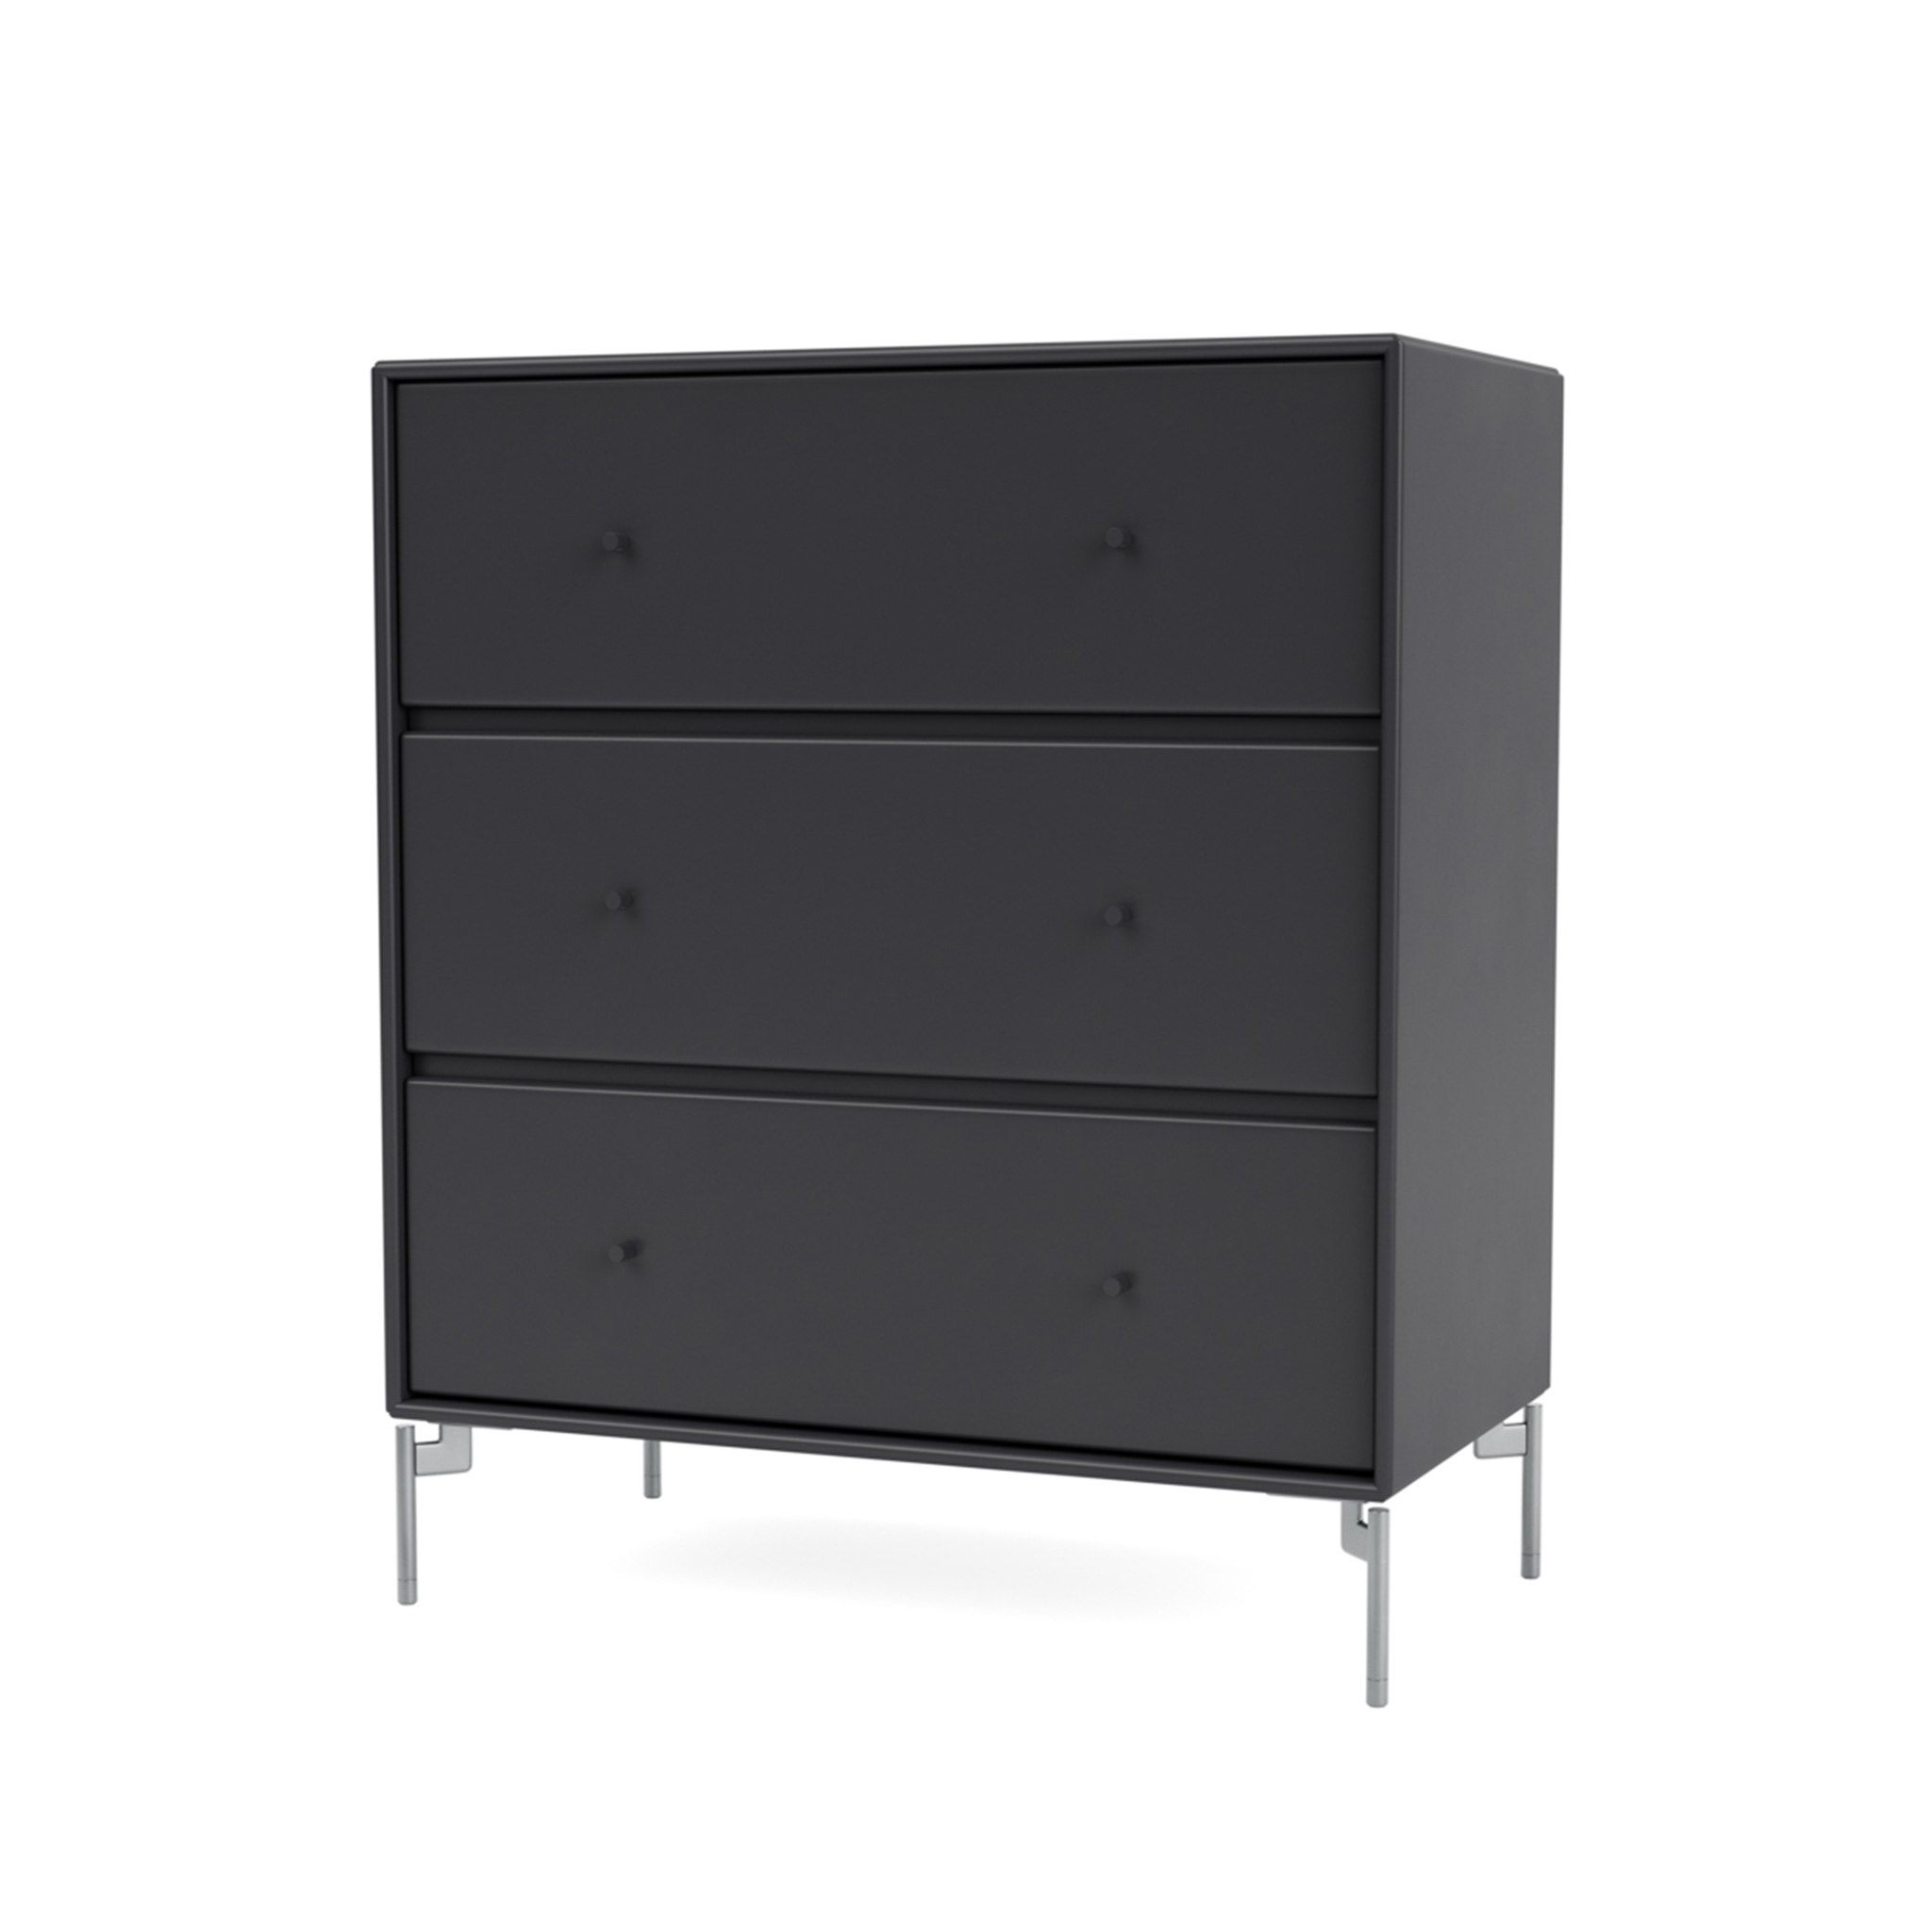 MONTANA // CARRY - CHEST OF DRAWERS WITH 3 DRAWERS | 04 ANTHRACITE | LEG COLOUR: SATIN CHROME